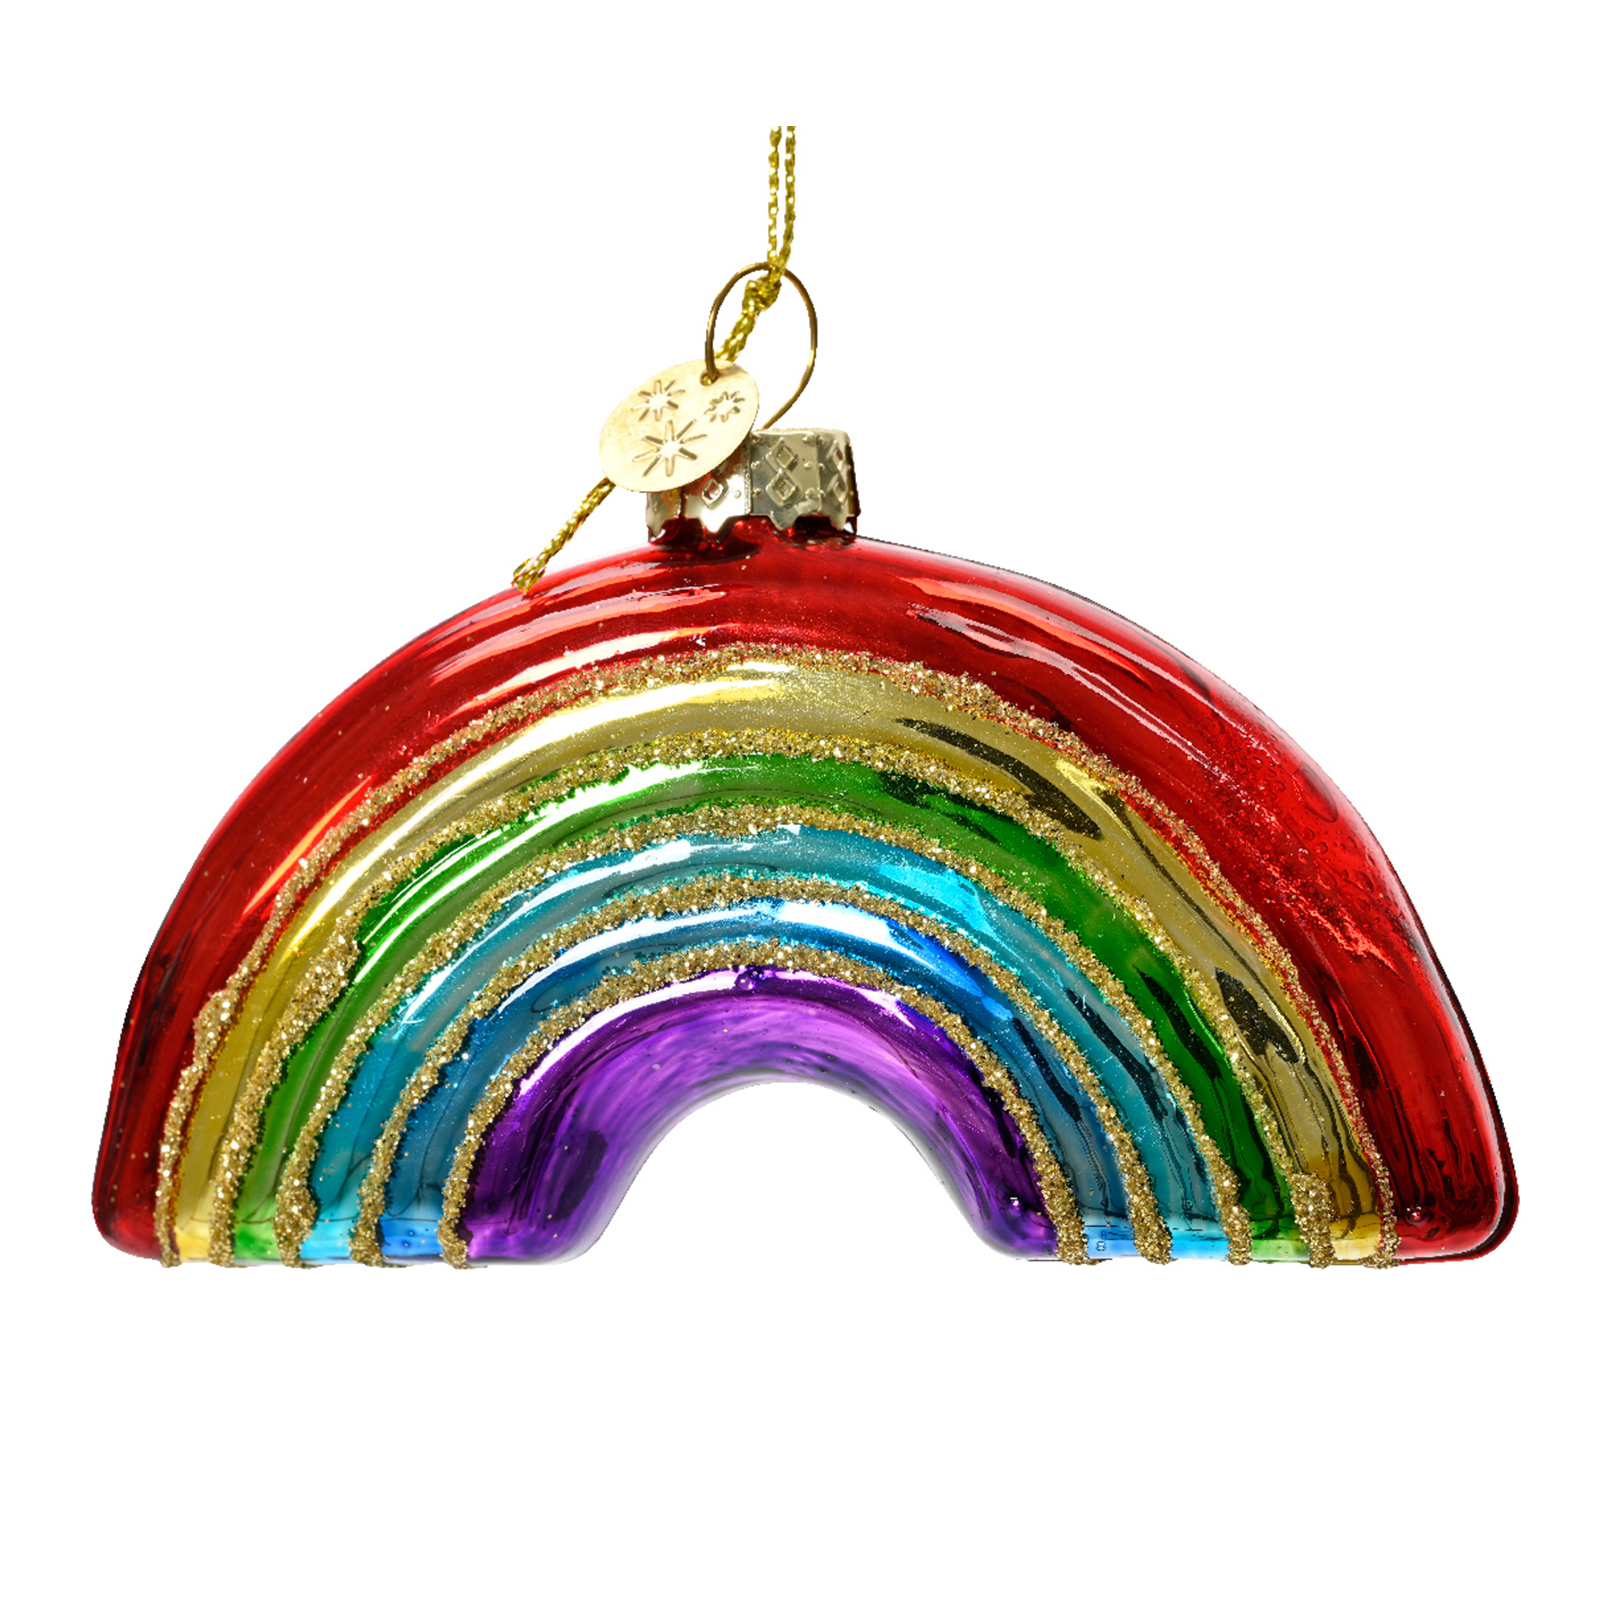 Chrome rainbow tree decoration, with gold glitter in-between the colours separating them.